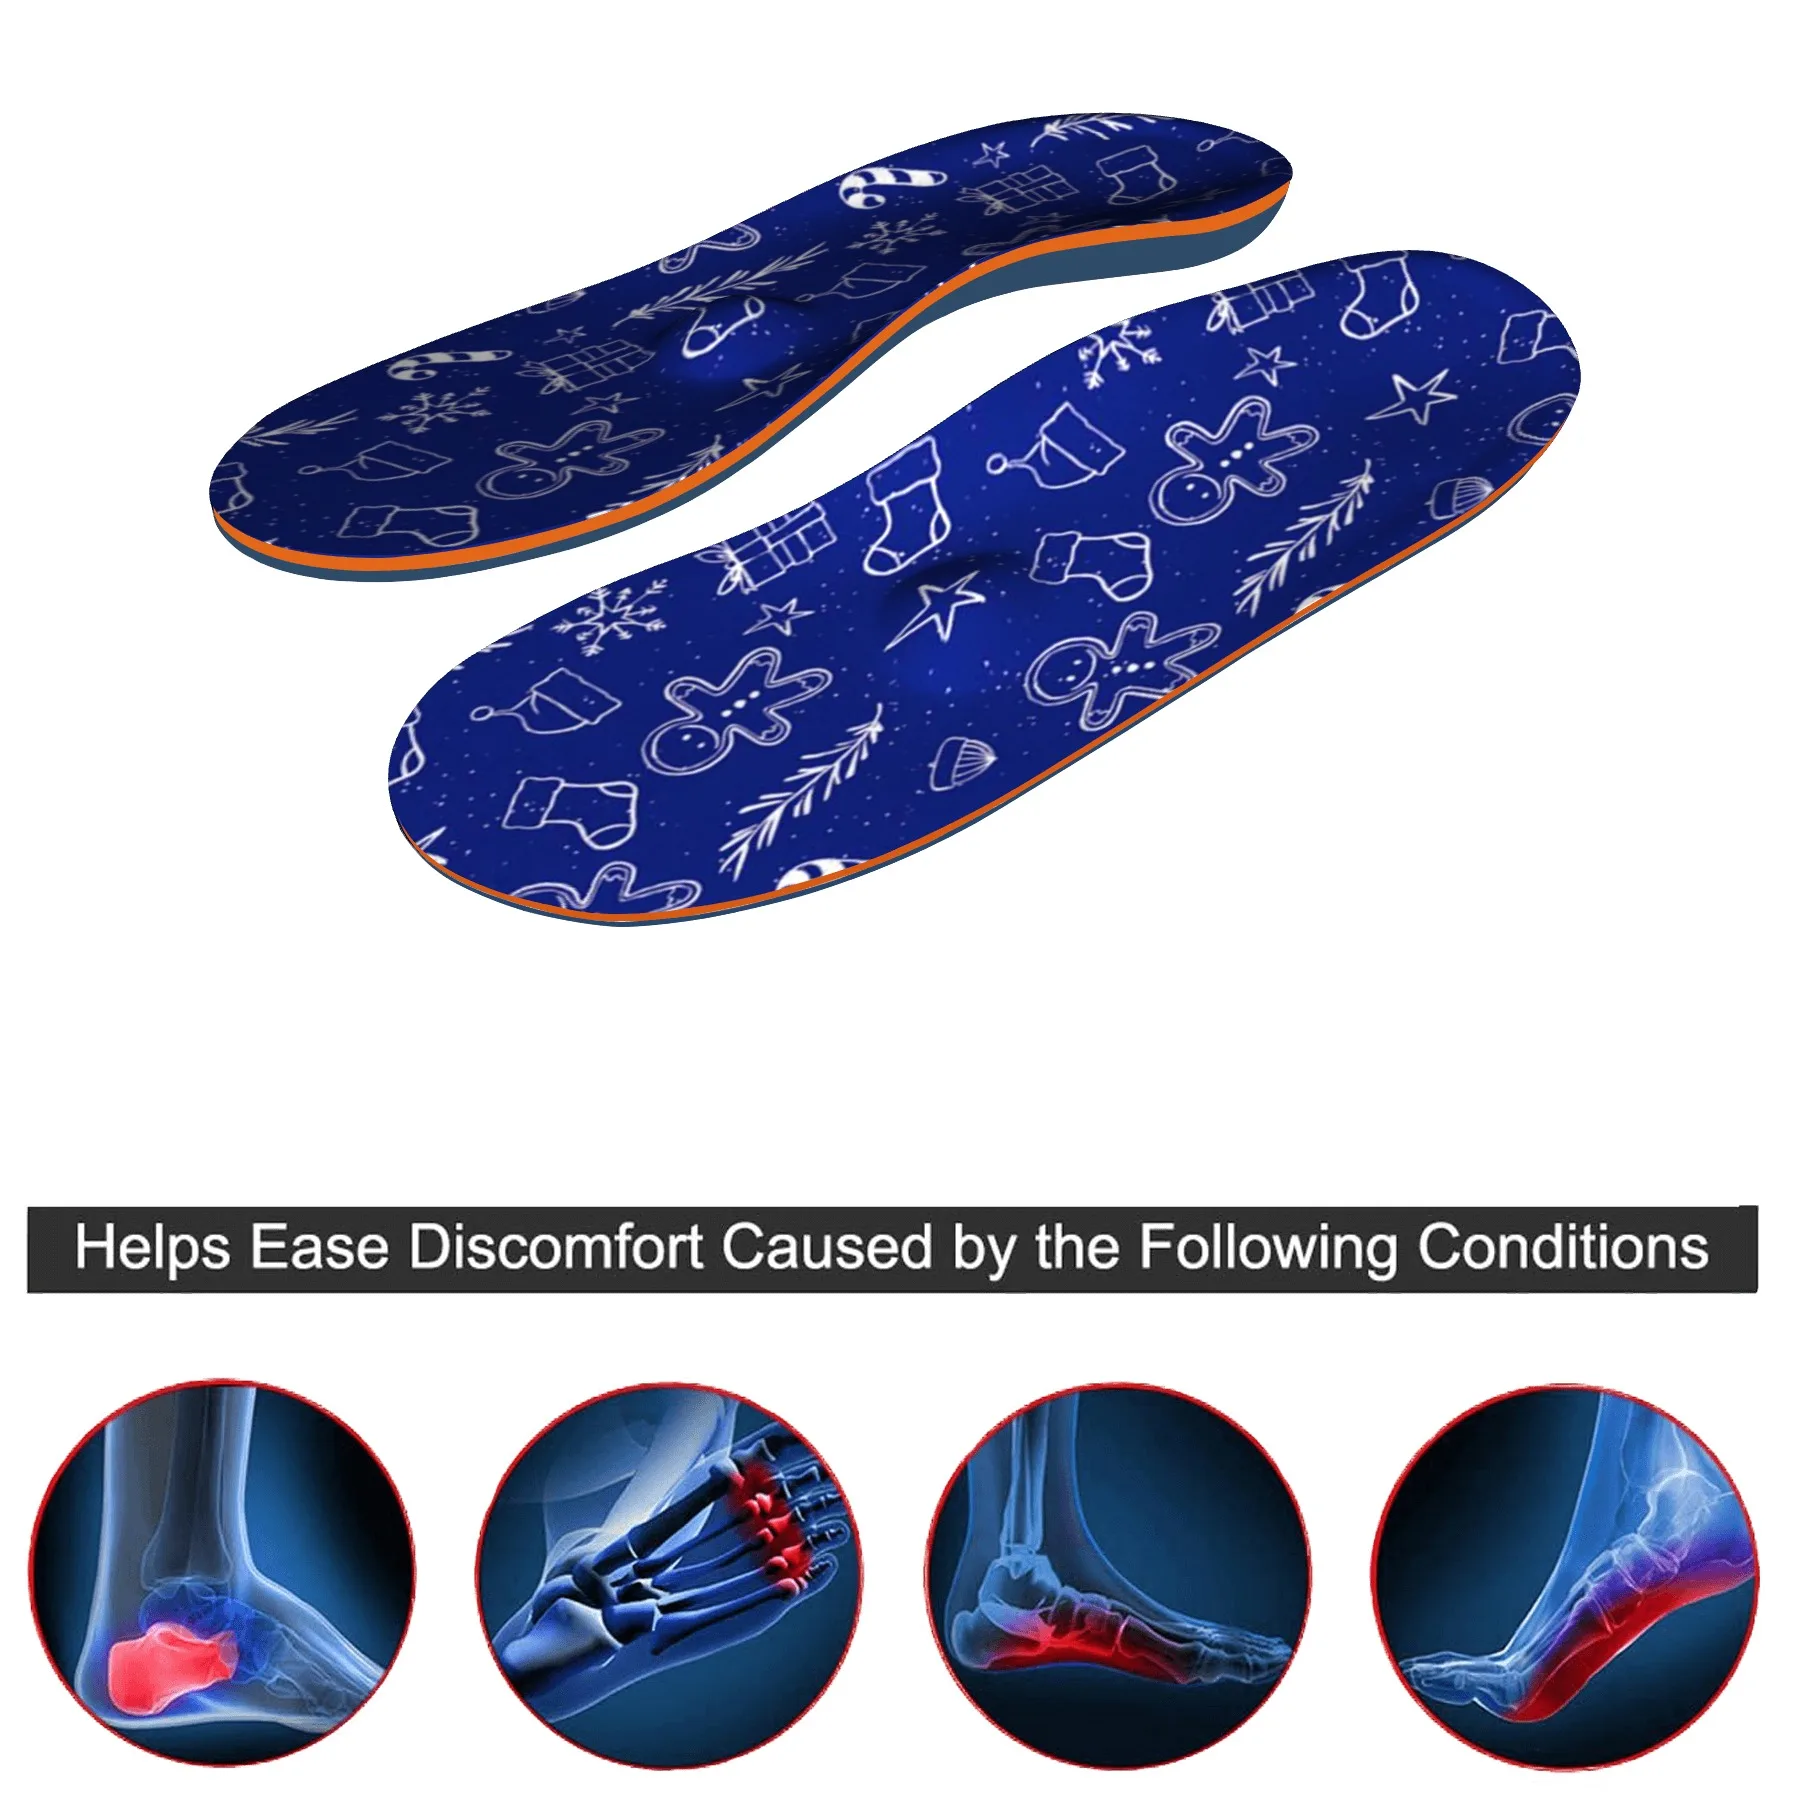 Flat Feet Orthopedic Template Plantar Fasciitis Arch Support Men Heel Pain Foot Insert Insoles Heated Sneakers Boots Cushion